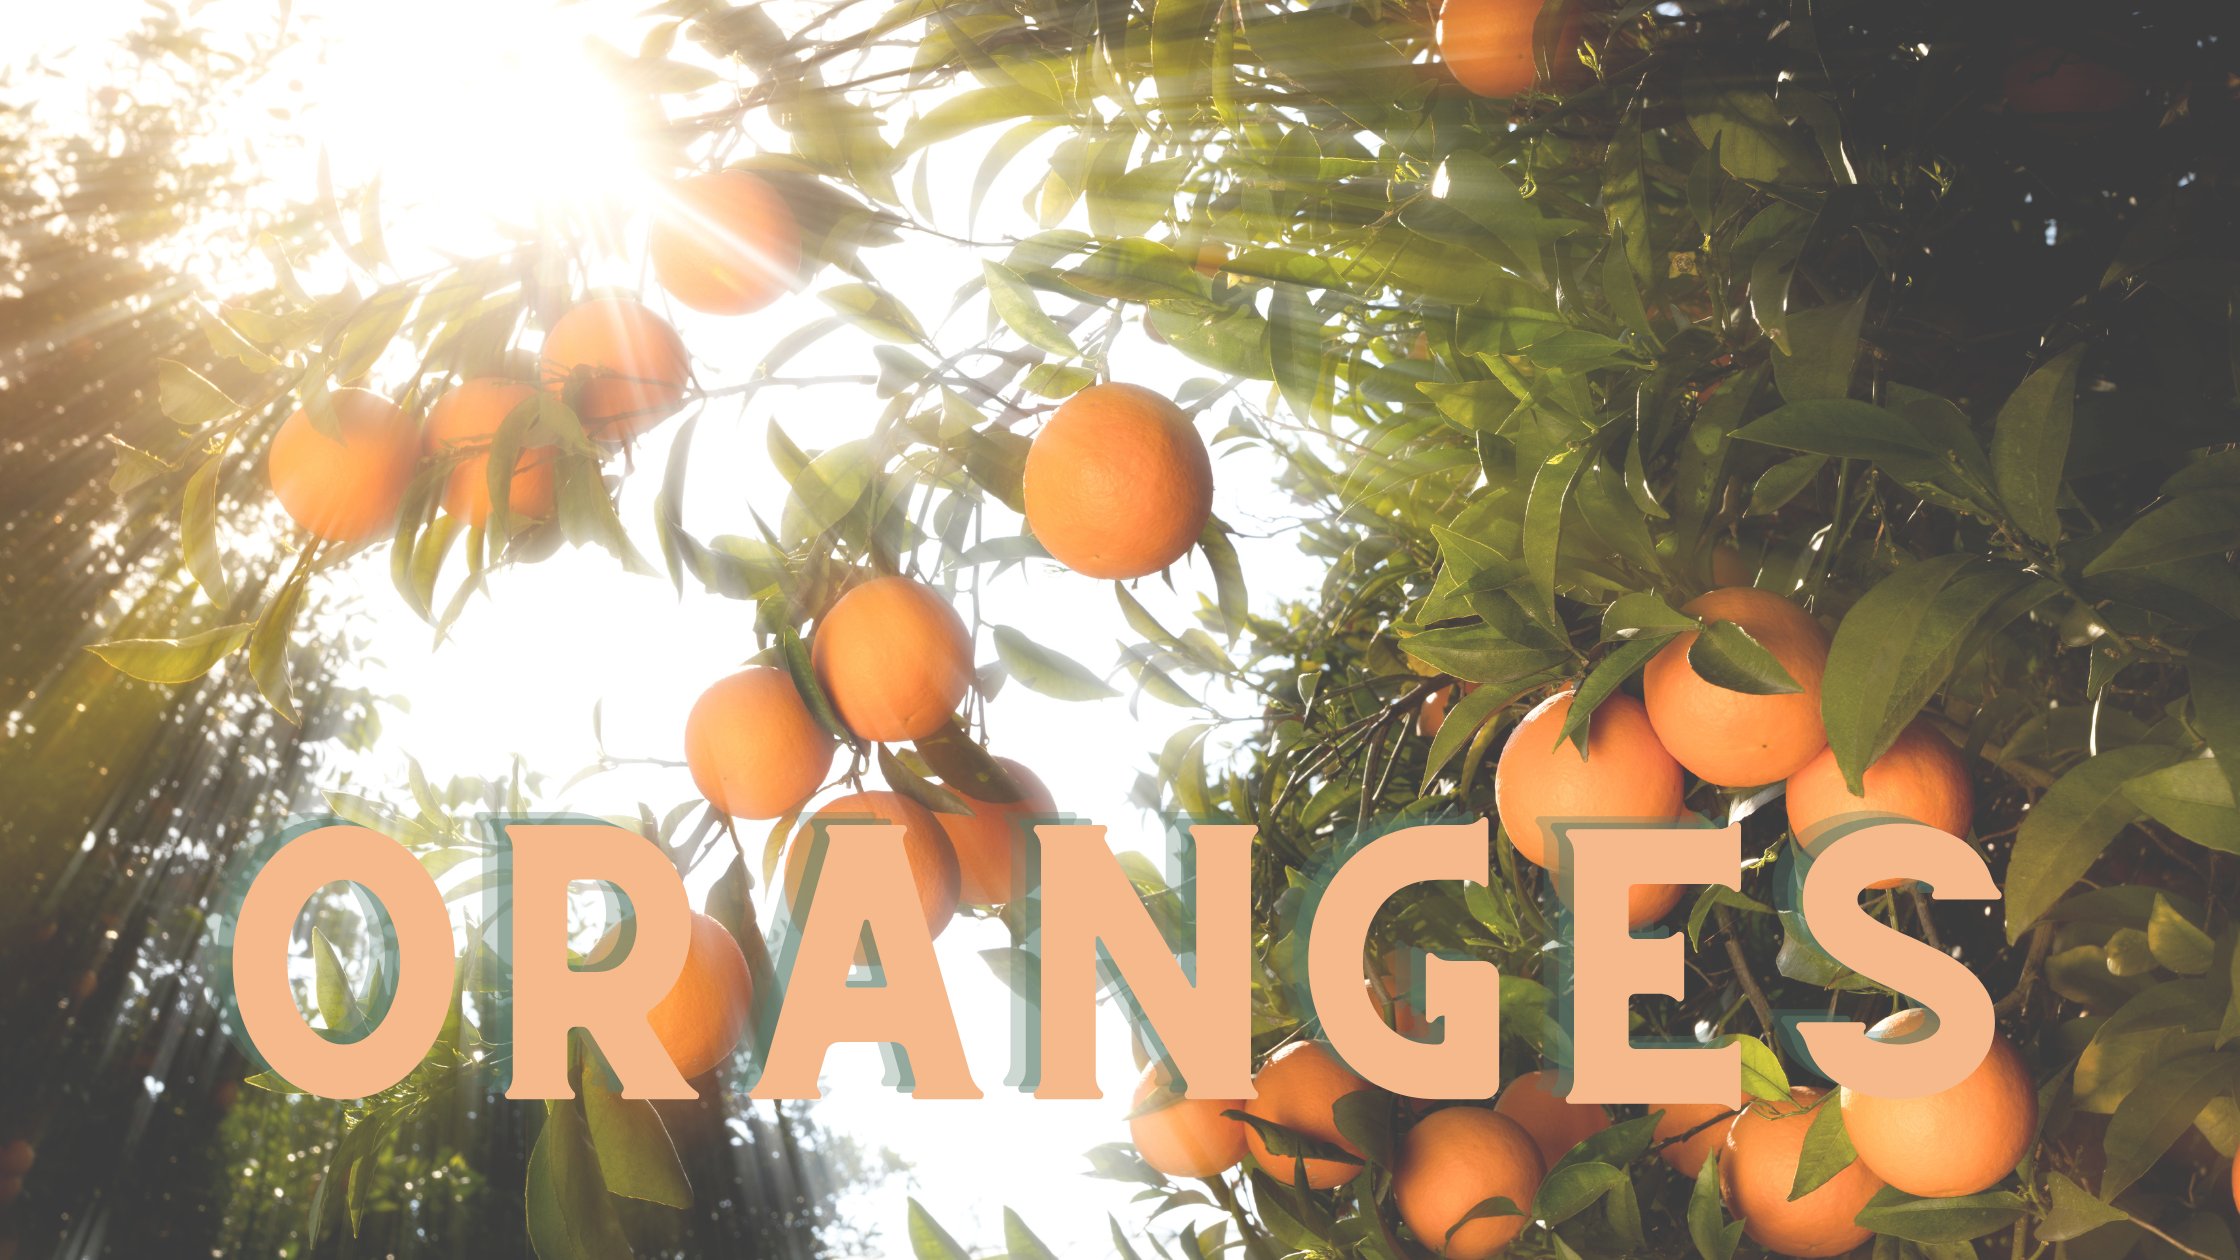 Feature image for "ORANGES" blog post